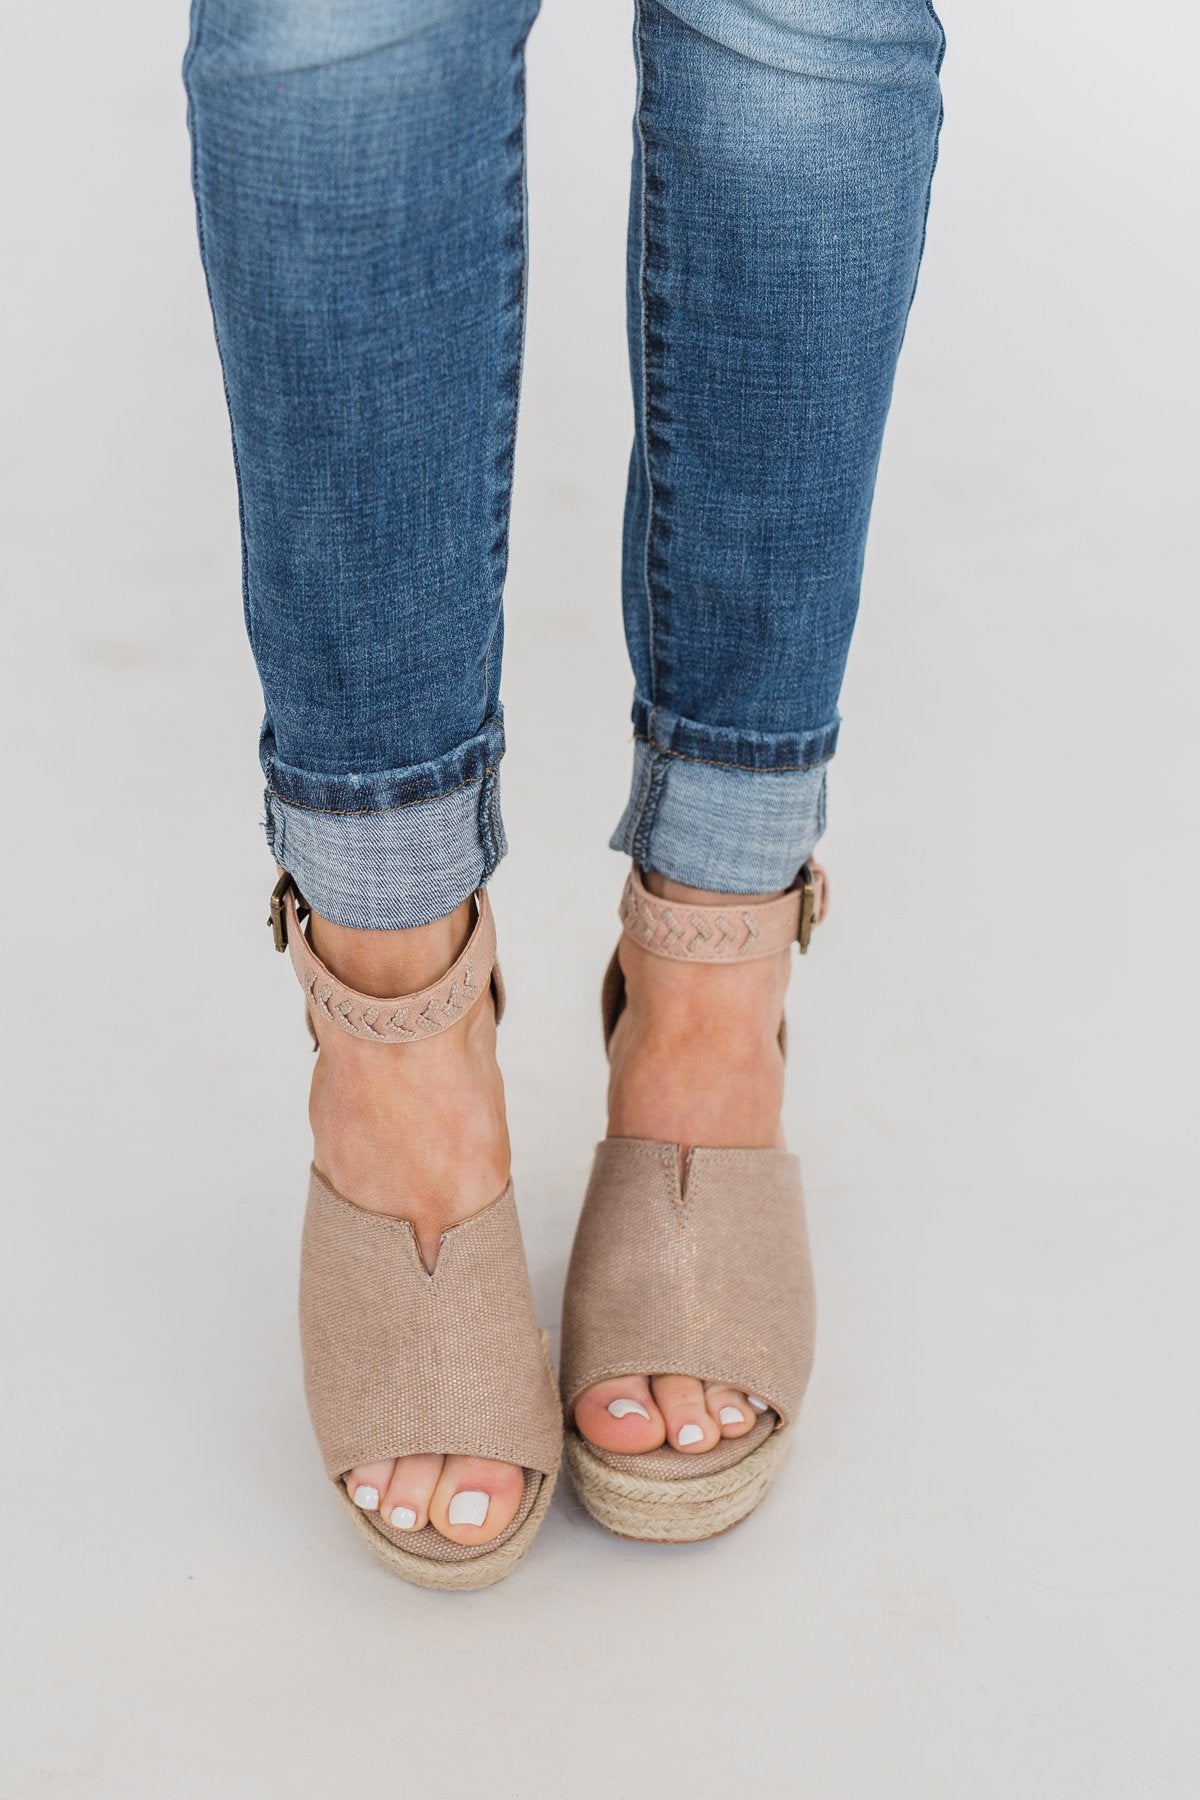 Not Rated Leif Wedges- Rose Gold